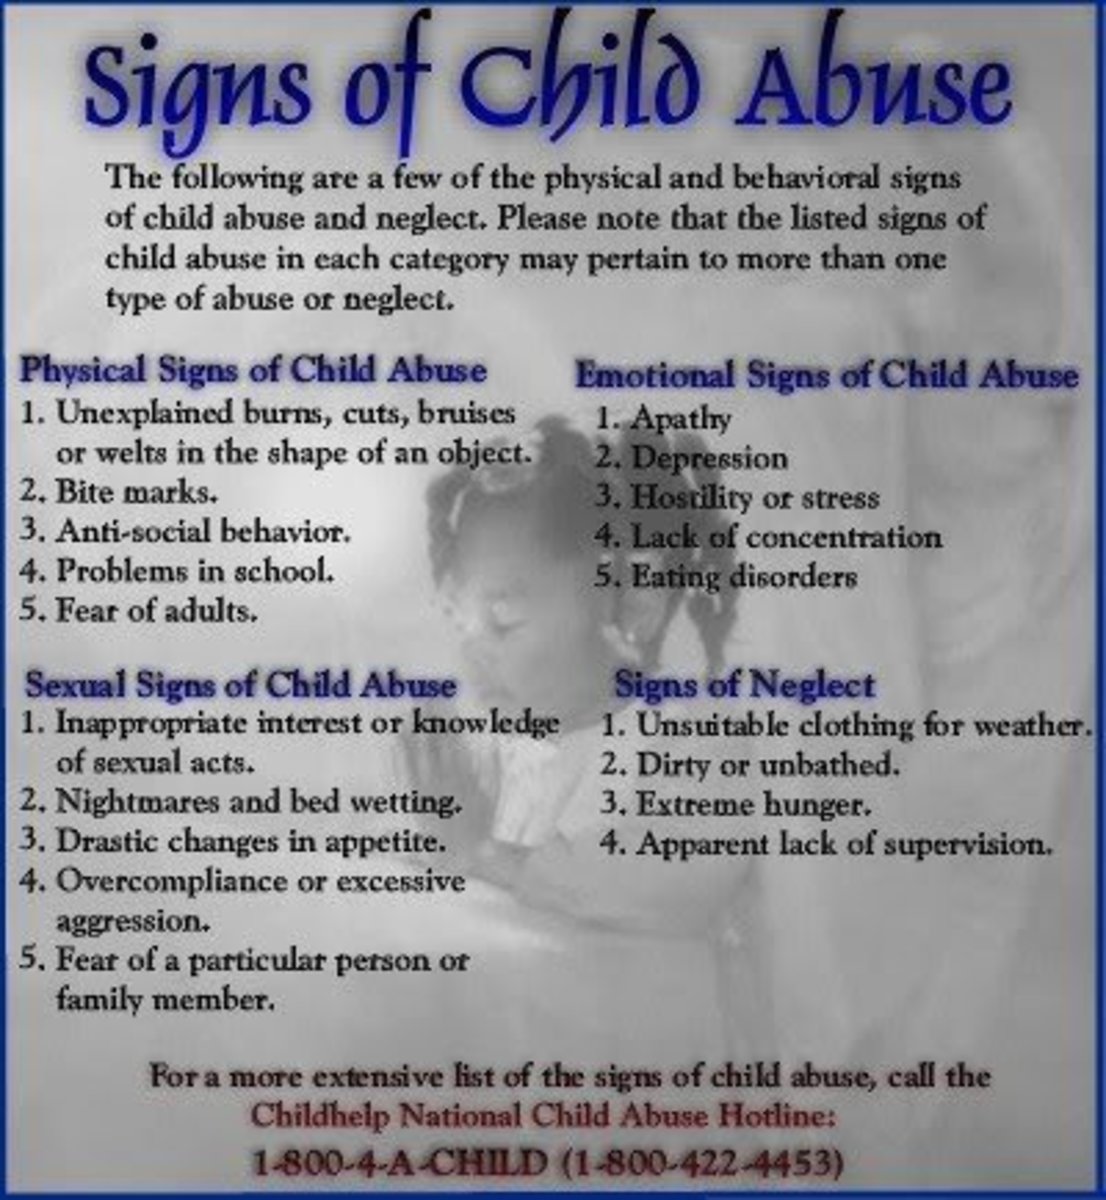 These are not all inclusive signs, but they are a good reference when in doubt. Always contact Child Protective Services or the Department of Social Services if you feel a child is being harmed. 